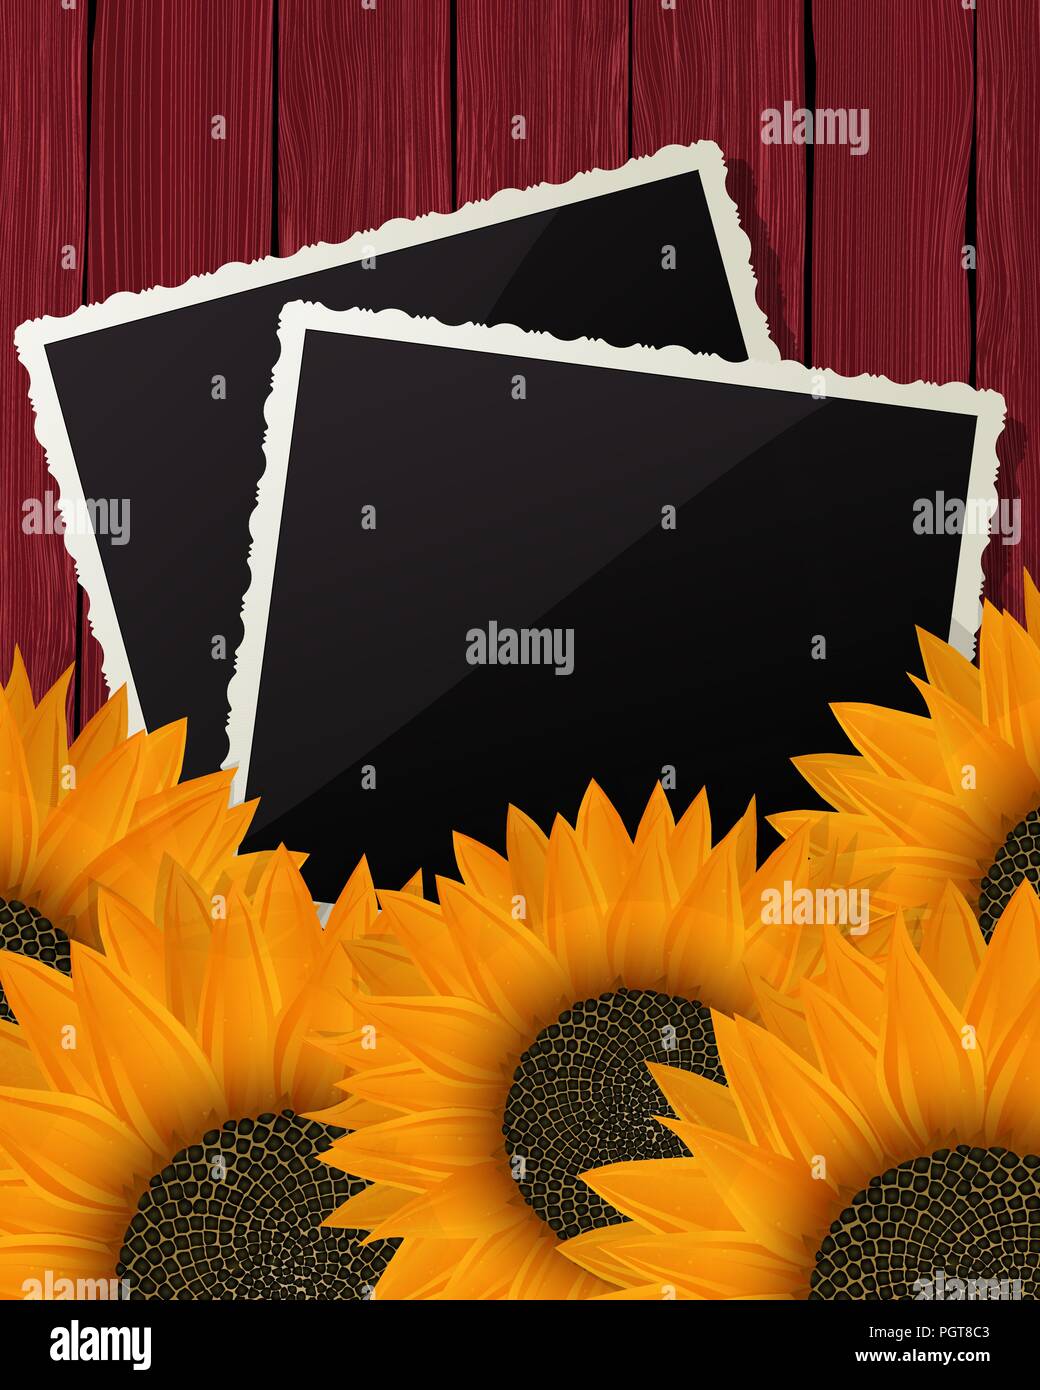 Summer collage with vintage photo frames, sunflowers and wooden background. Layered vector design. Stock Vector